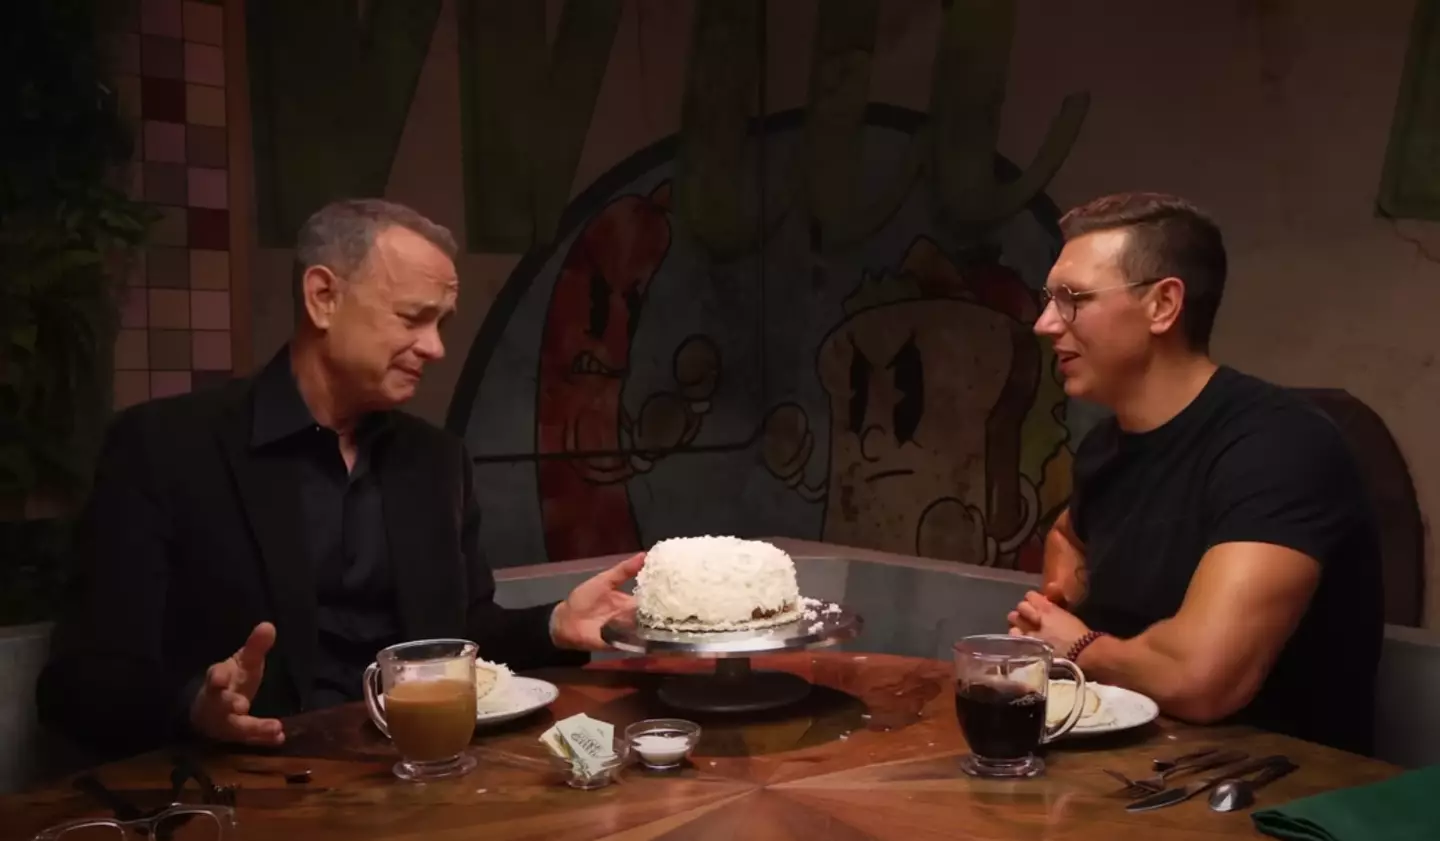 Hanks spoke about the cake on Mythical Kitchen's Last Meals series.